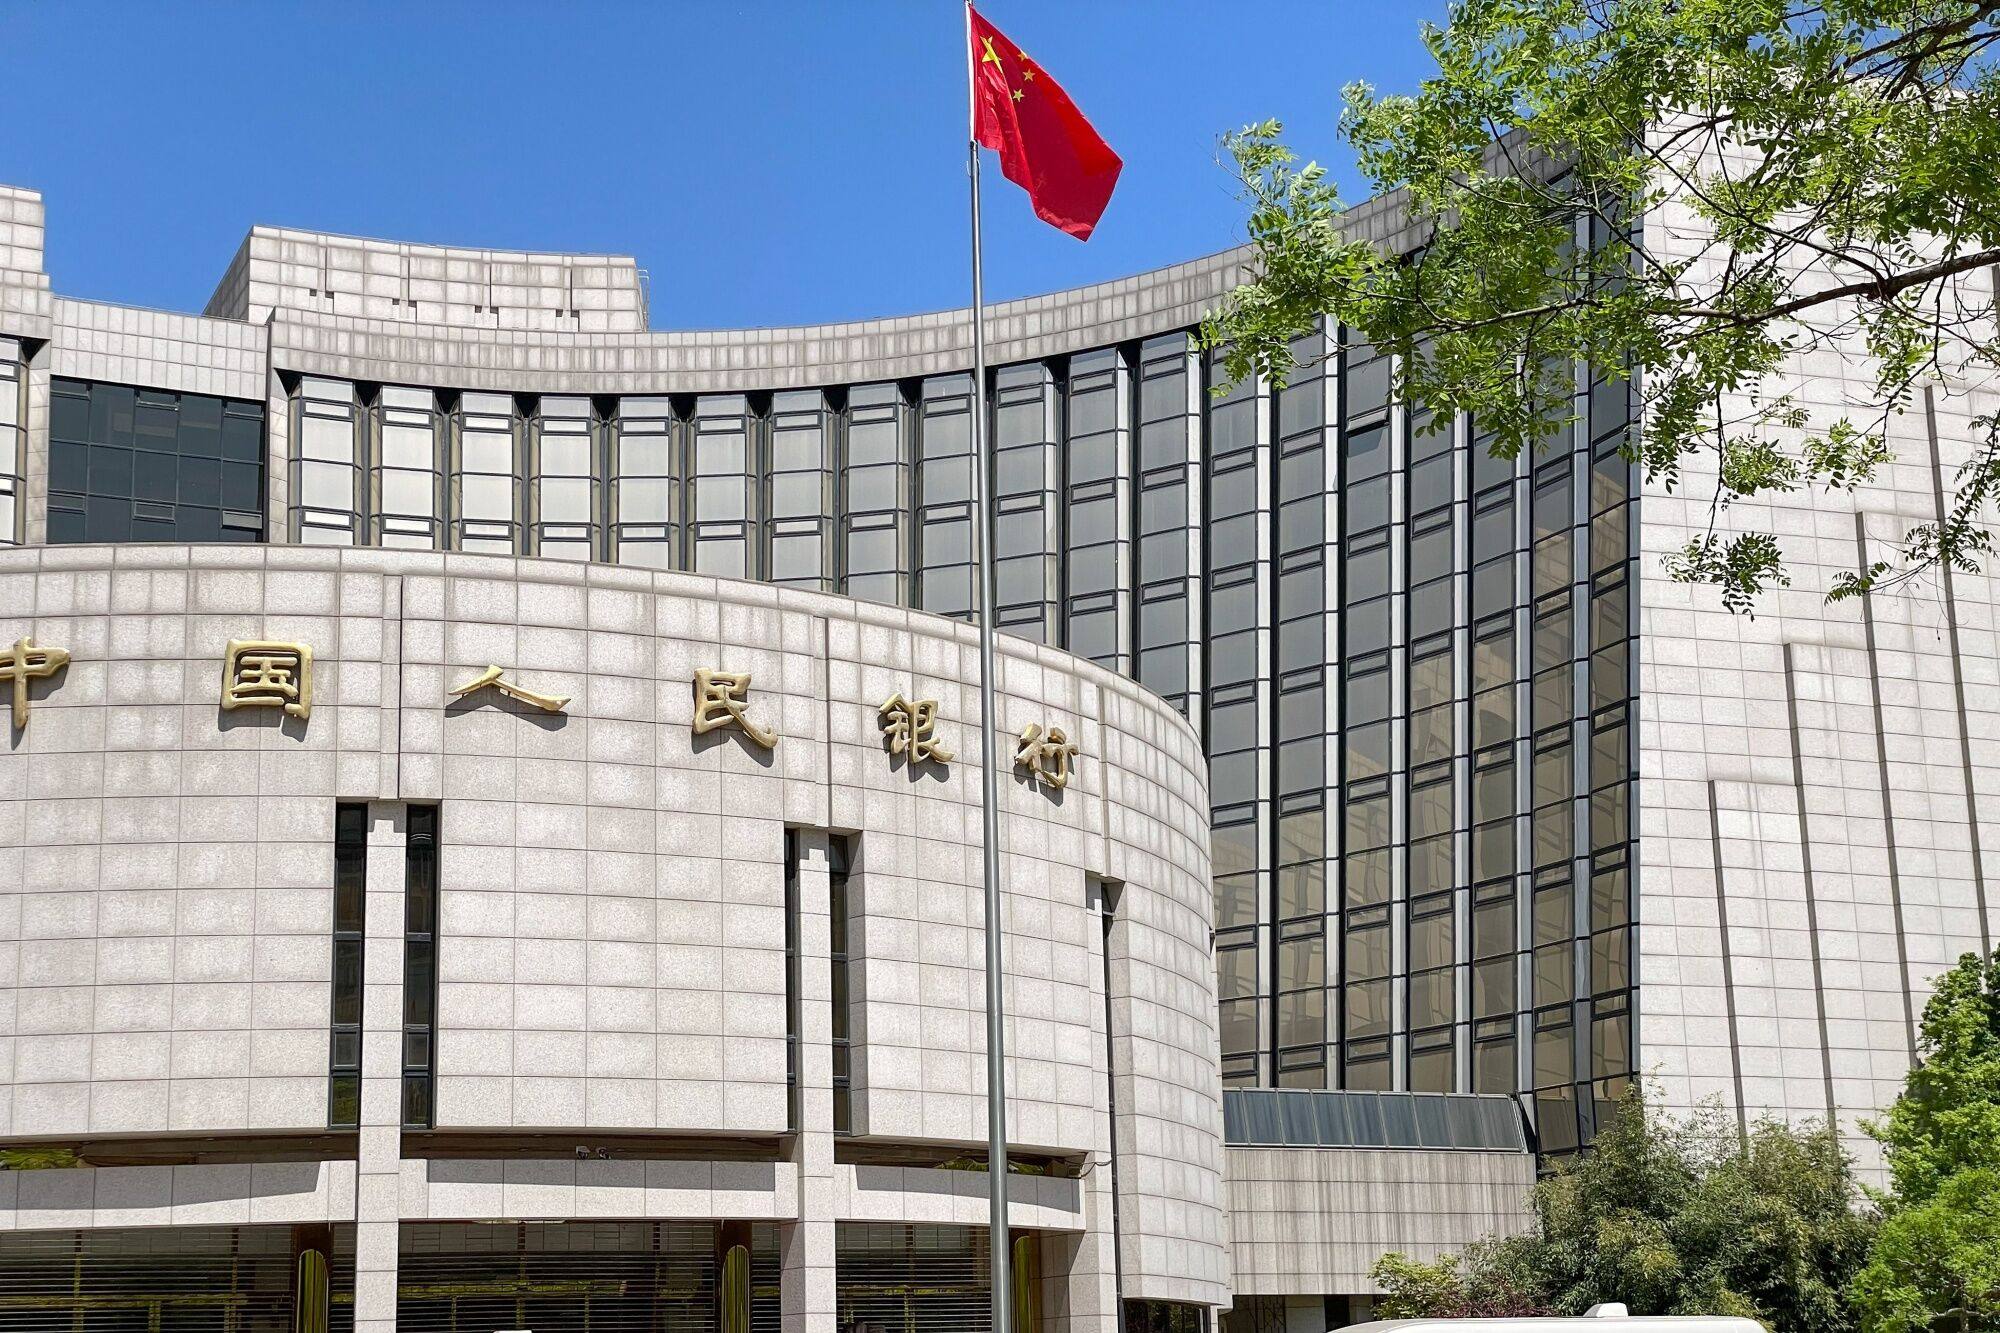 The People’s Bank of China (PBOC) building in Beijing on Tuesday, April 18, 2023. Photo: Bloomberg